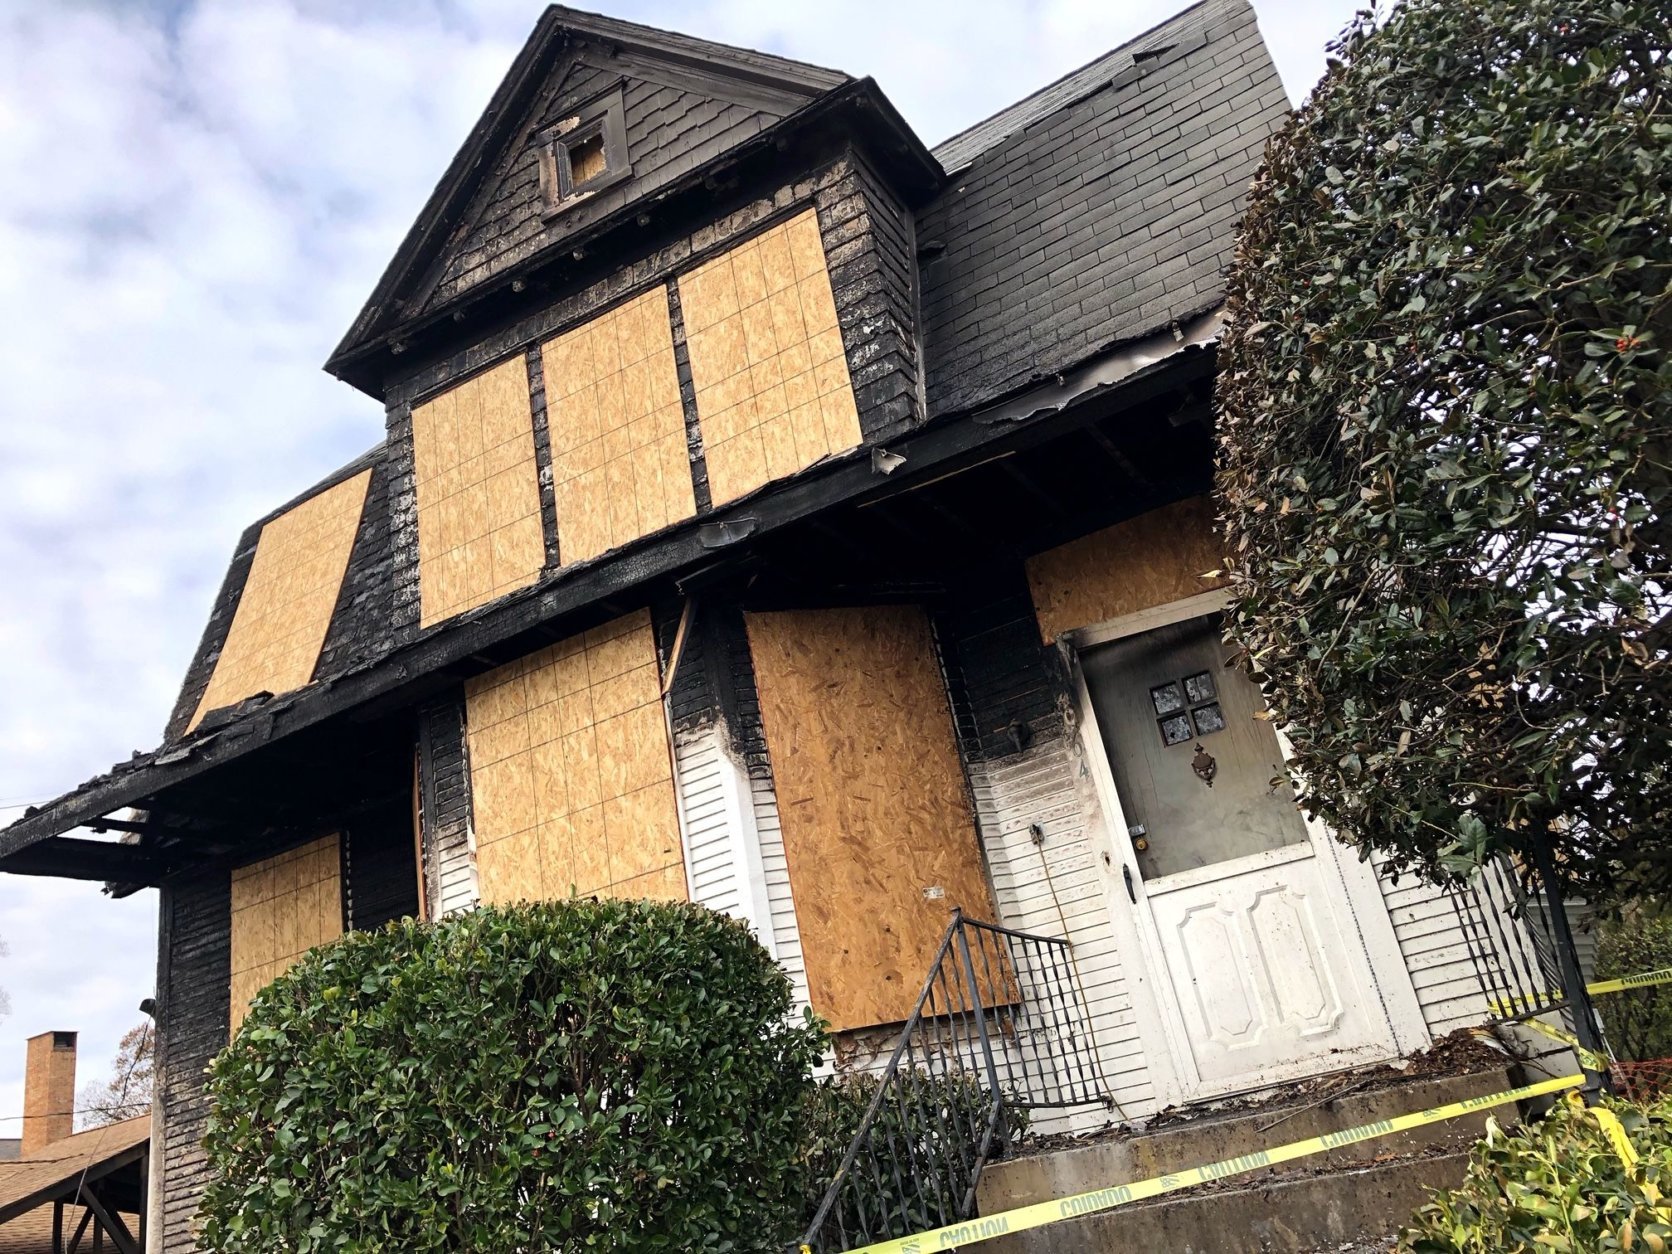 The aftermath of a fire Thursday that claimed the lives of a mother and son. (WTOP/Neal Augenstein)